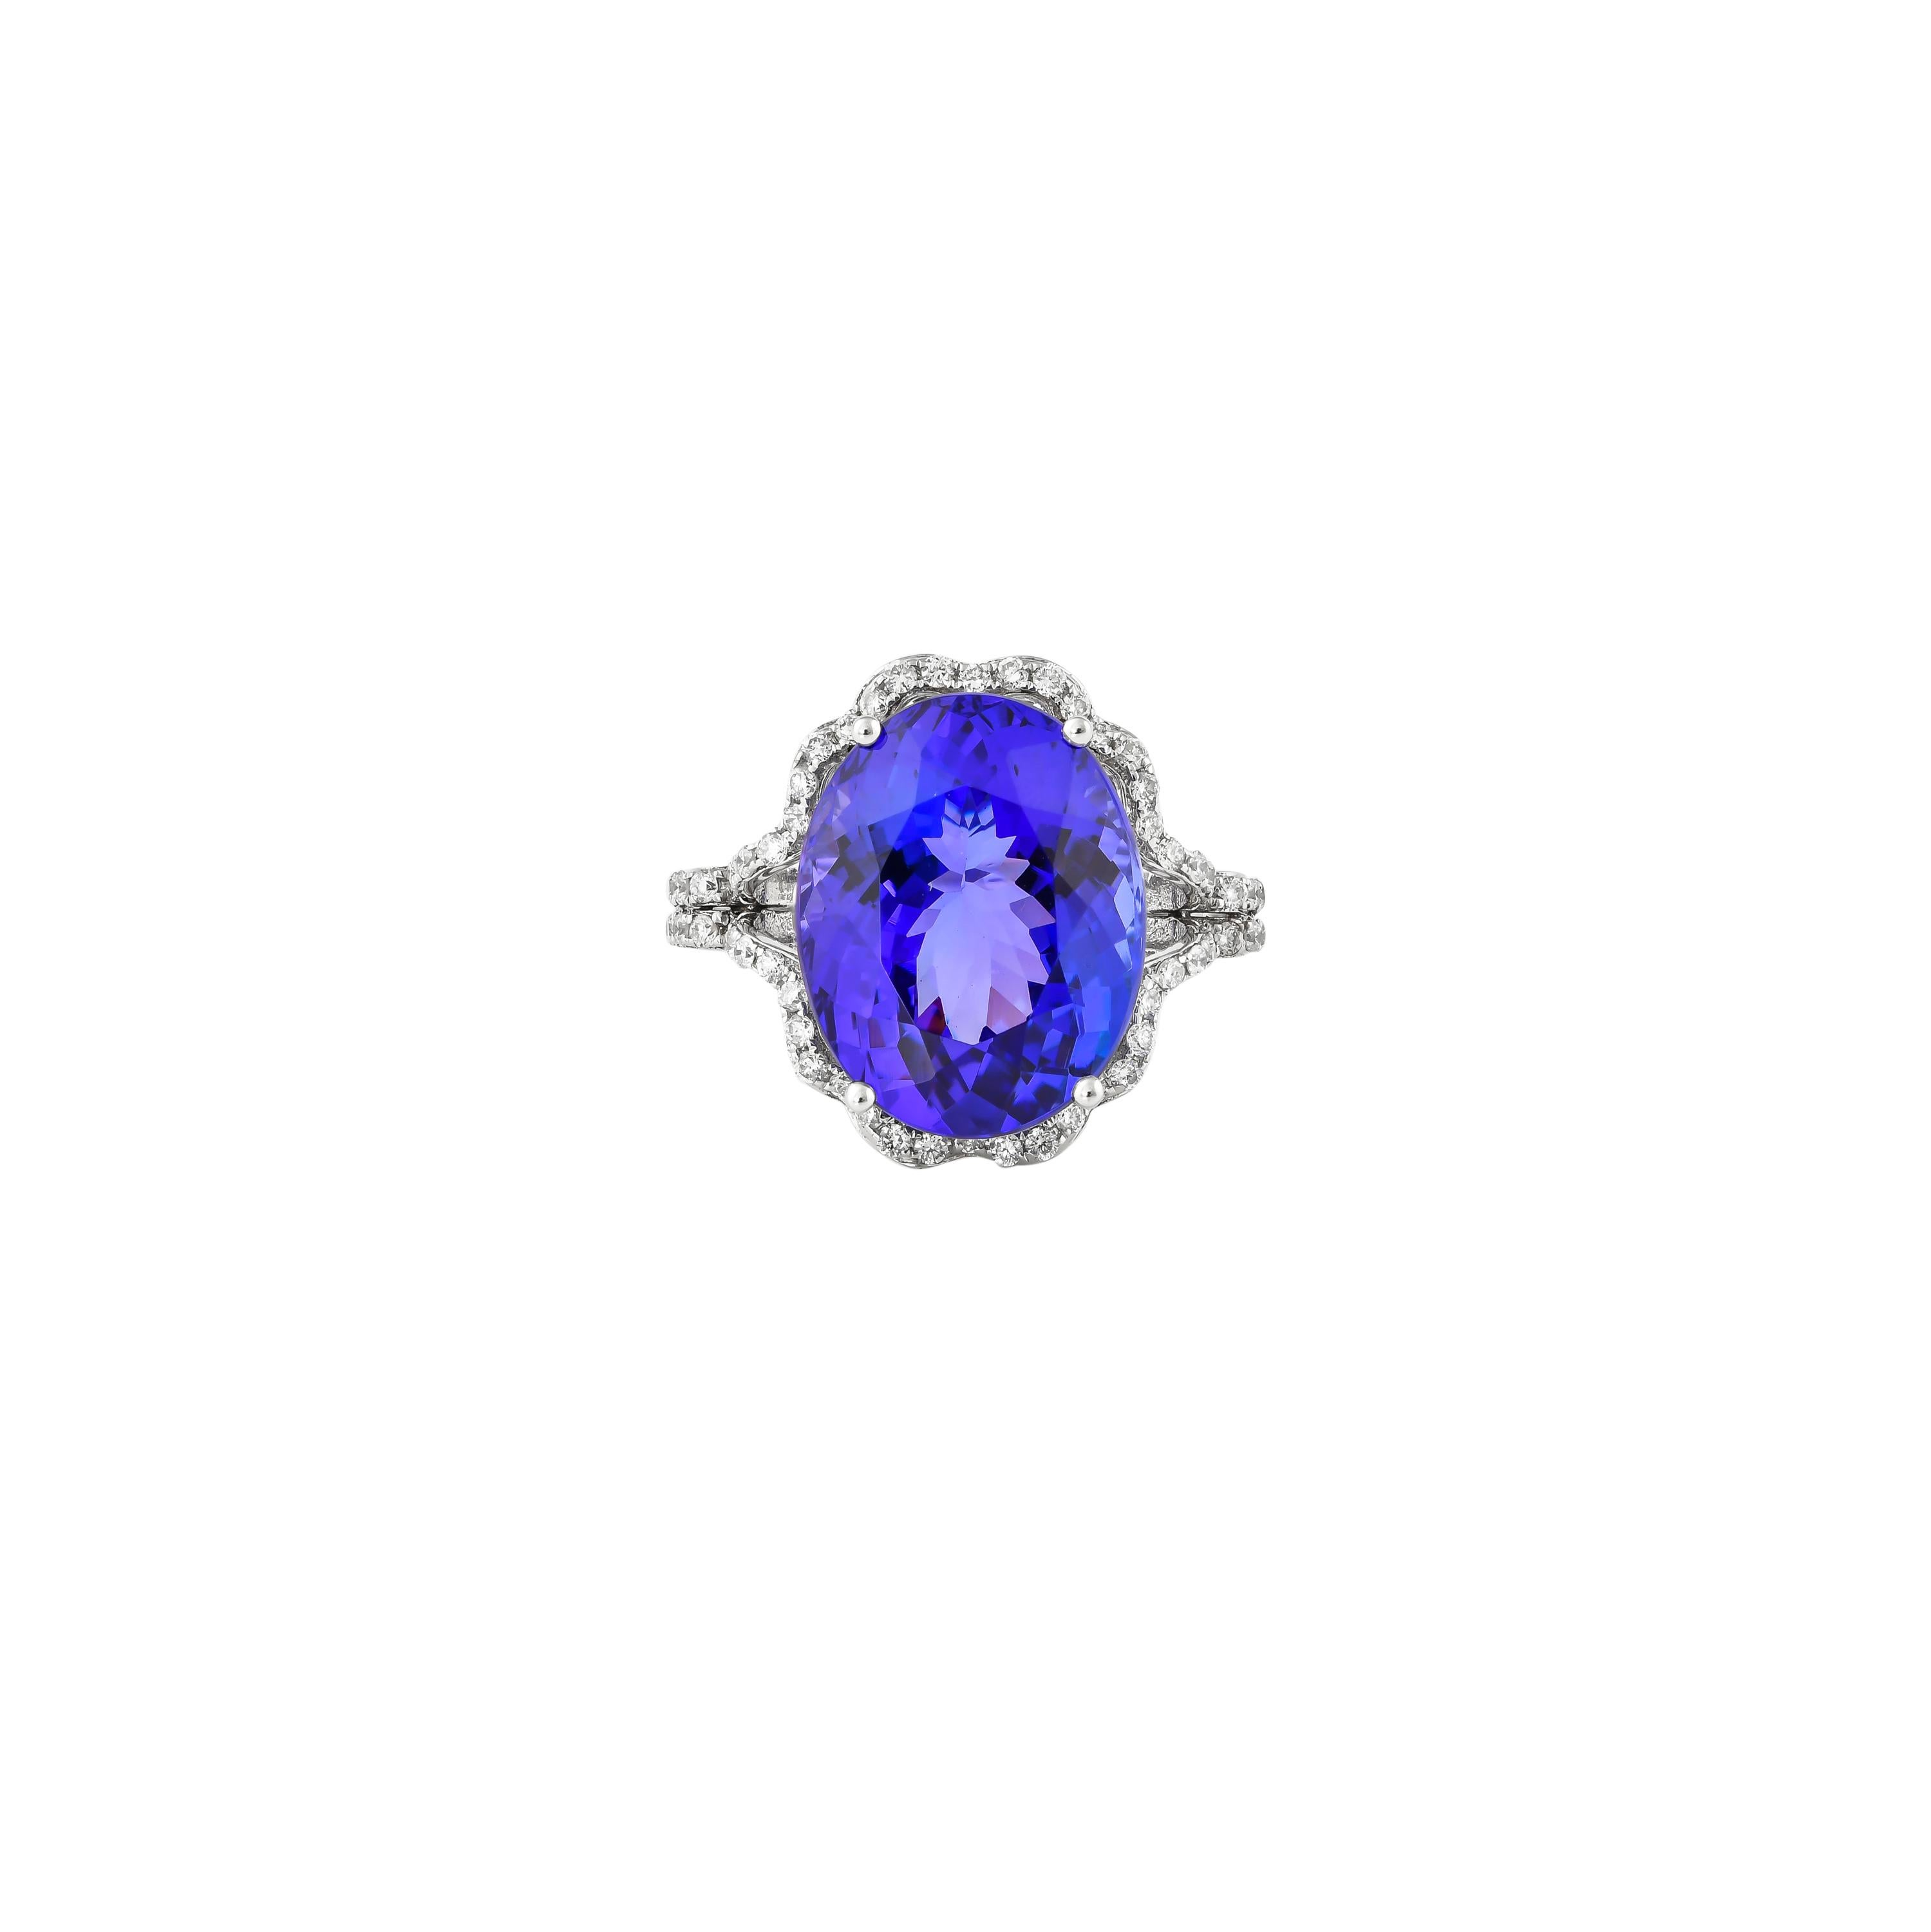 Oval Cut 11.3 Carat Tanzanite and White Diamond Ring in 18 Karat White Gold For Sale